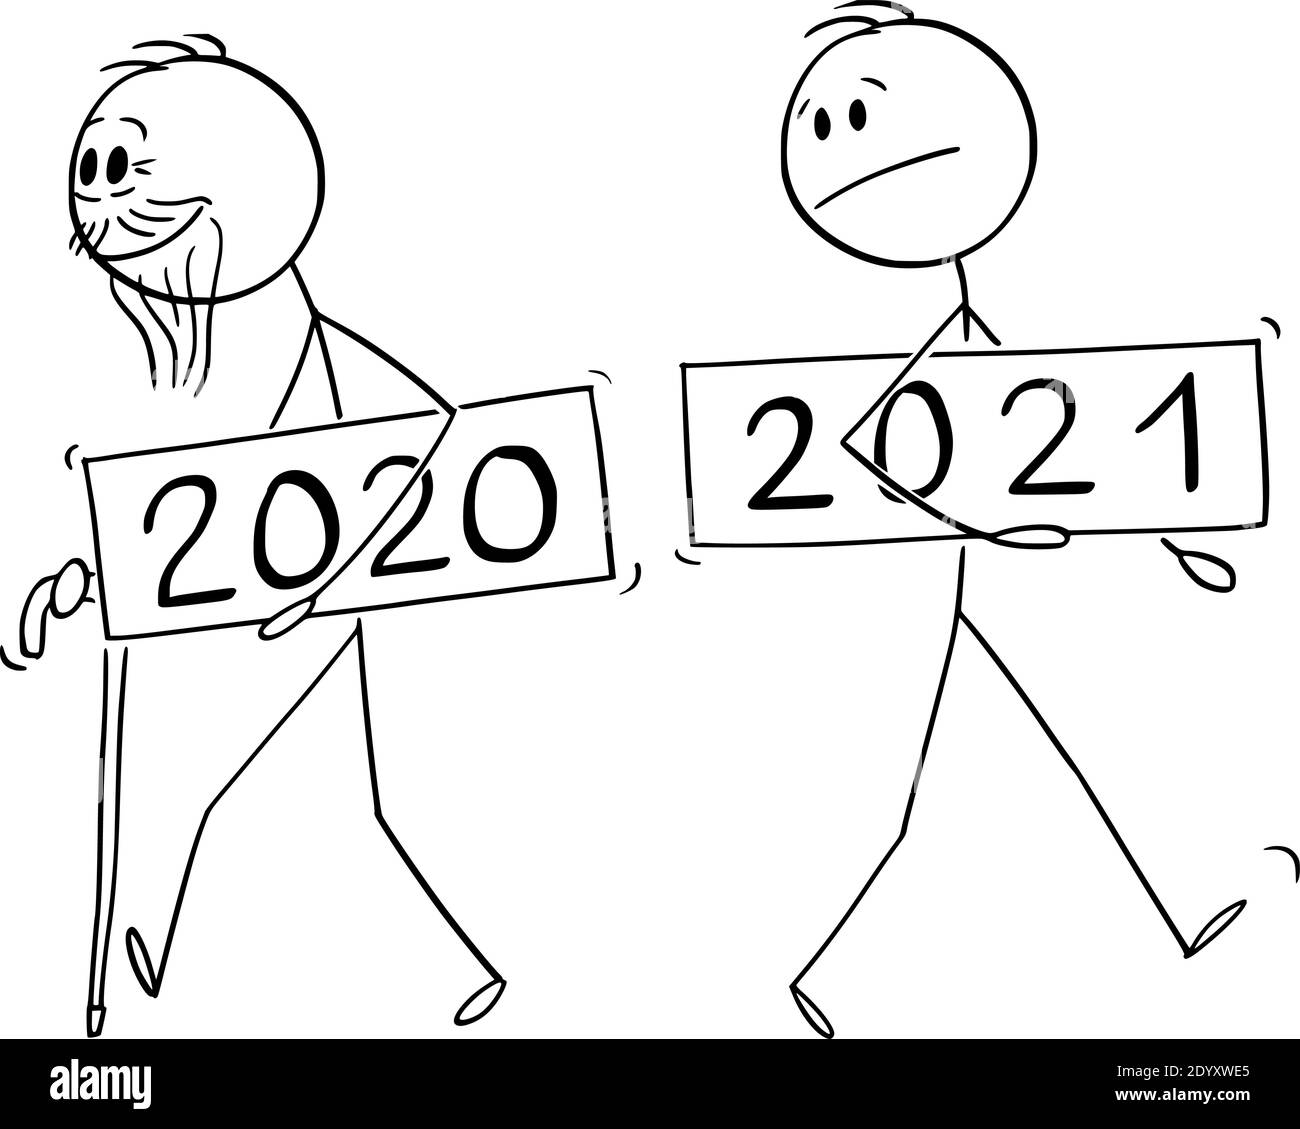 Vector cartoon stick figure illustration of old man year 2020 is leaving, new year 2021 is incoming. Stock Vector